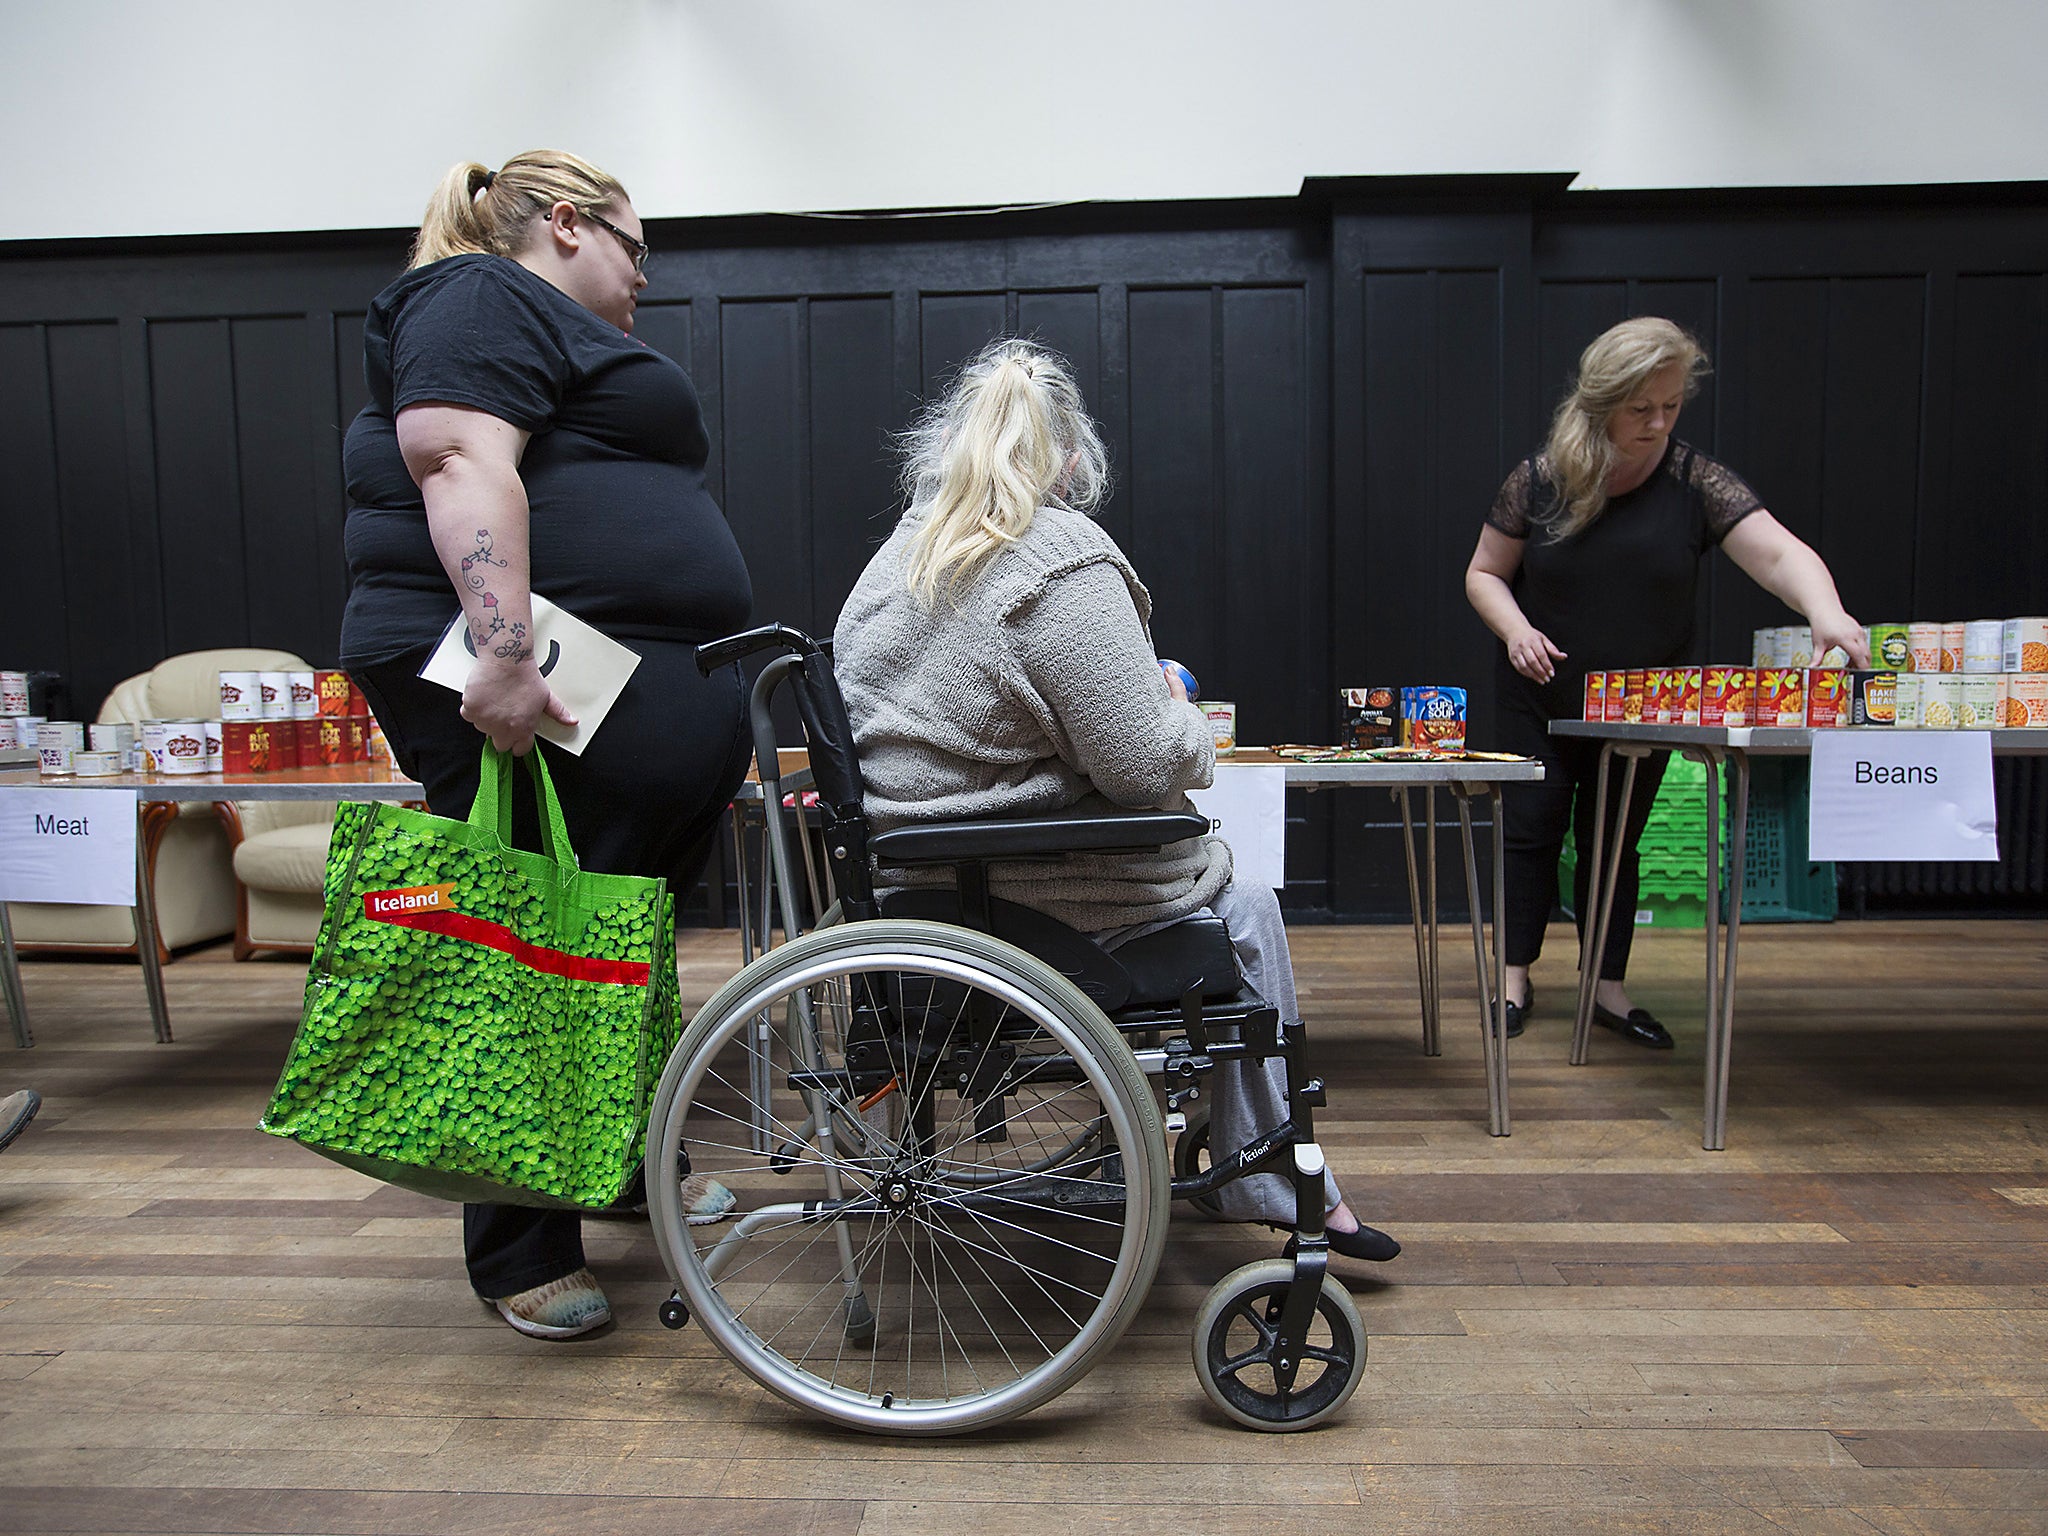 More Britons than ever rely to some degree on food banks